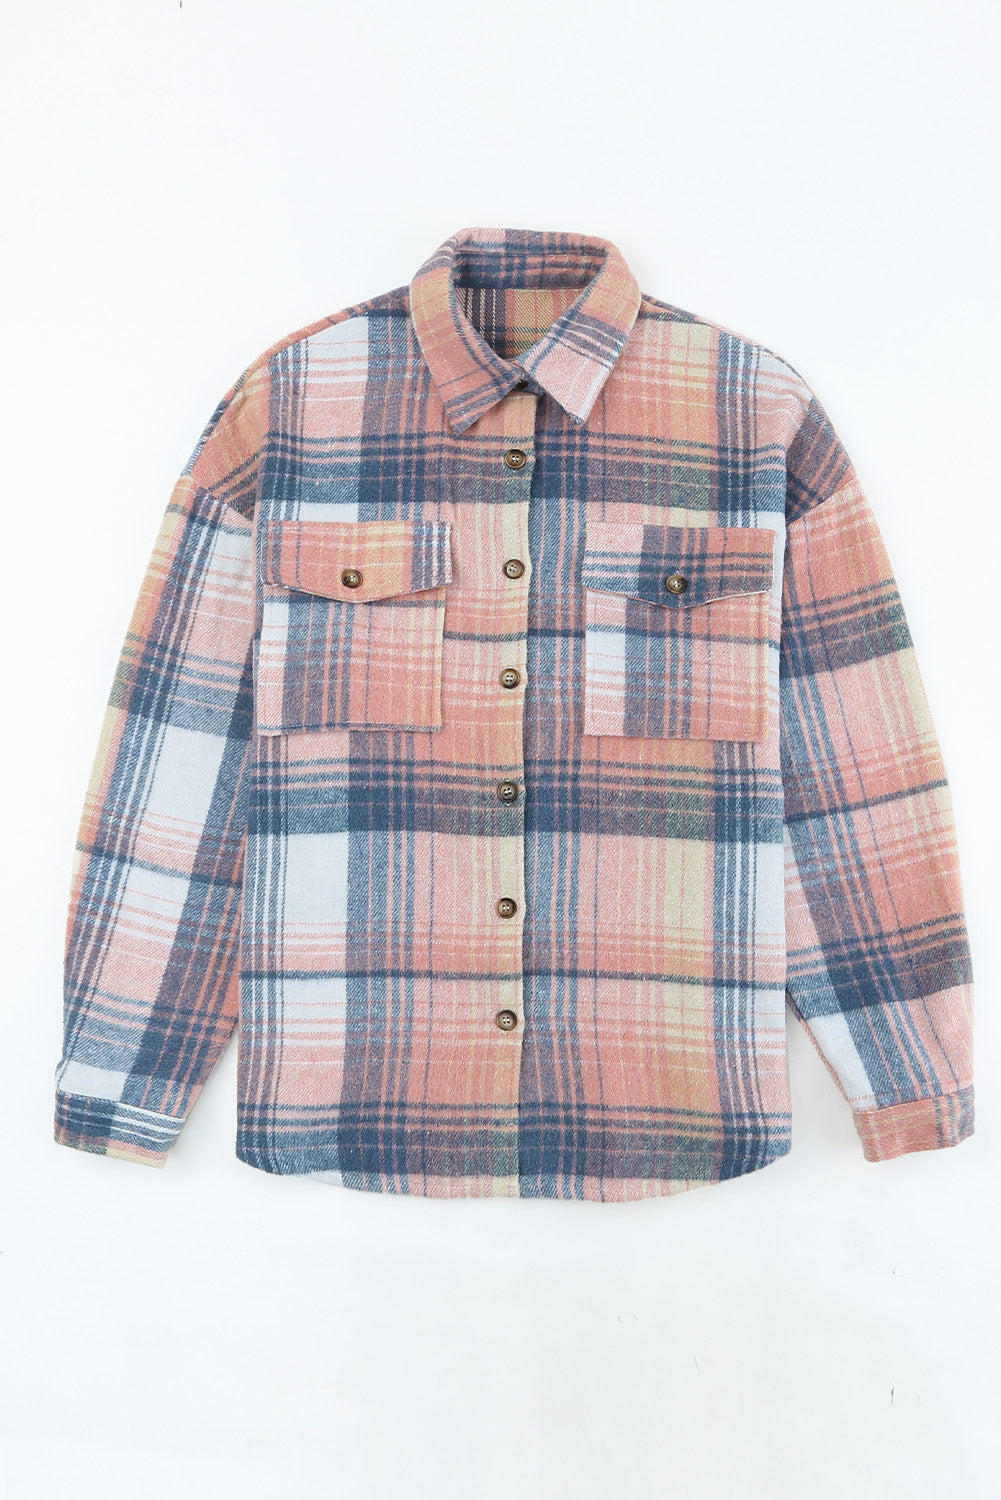 Cotton Candy Plaid Shacket